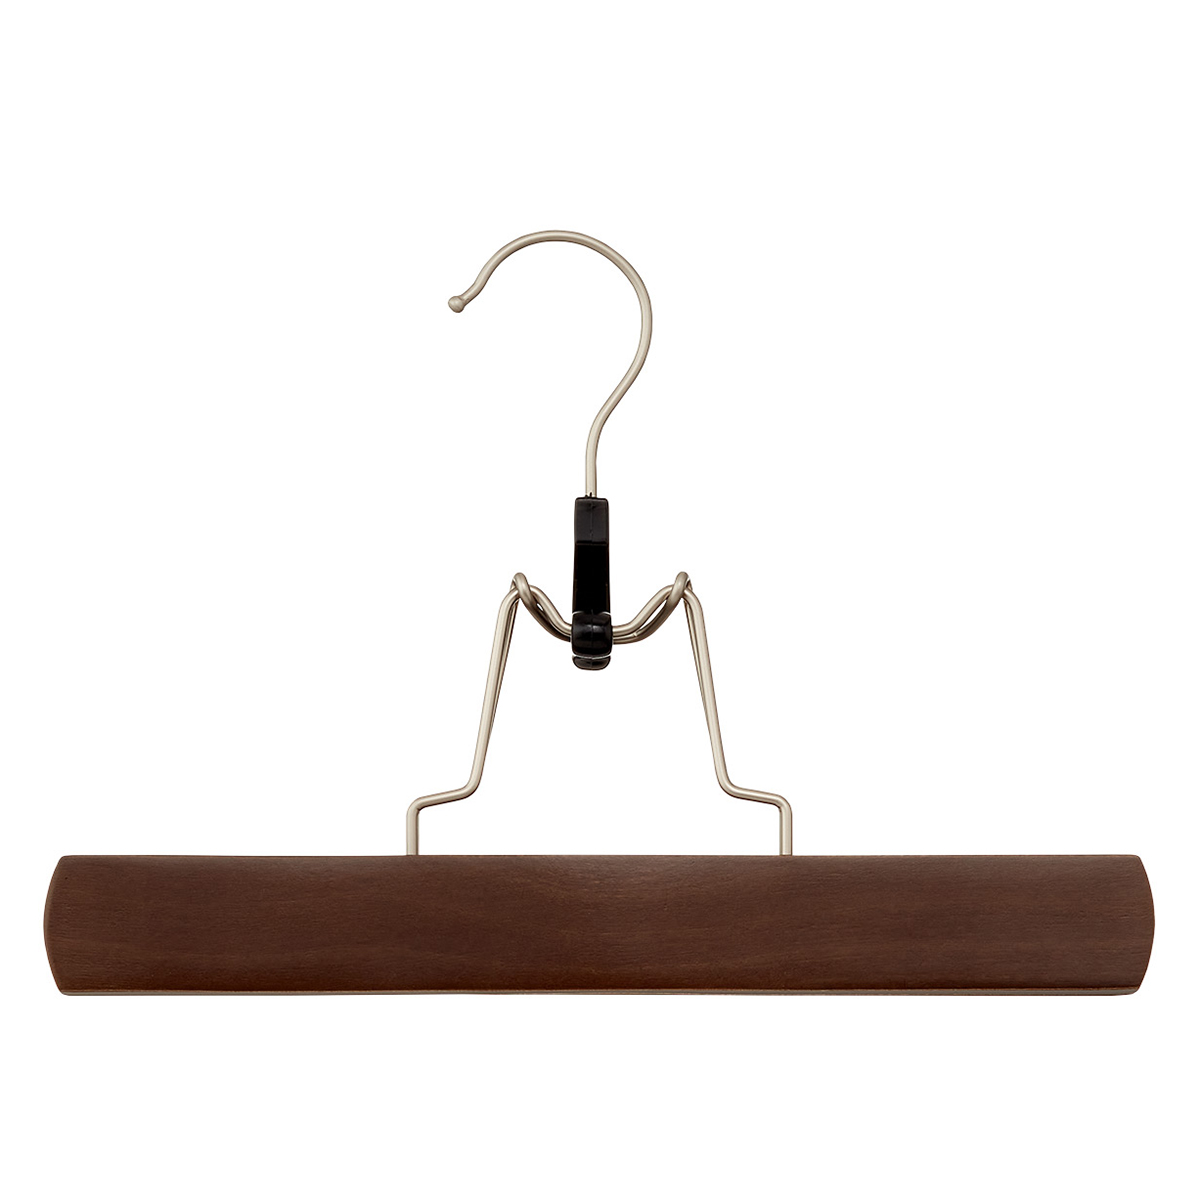 https://www.containerstore.com/catalogimages/478106/10091293-clamp-hanger-stained-birch.jpg